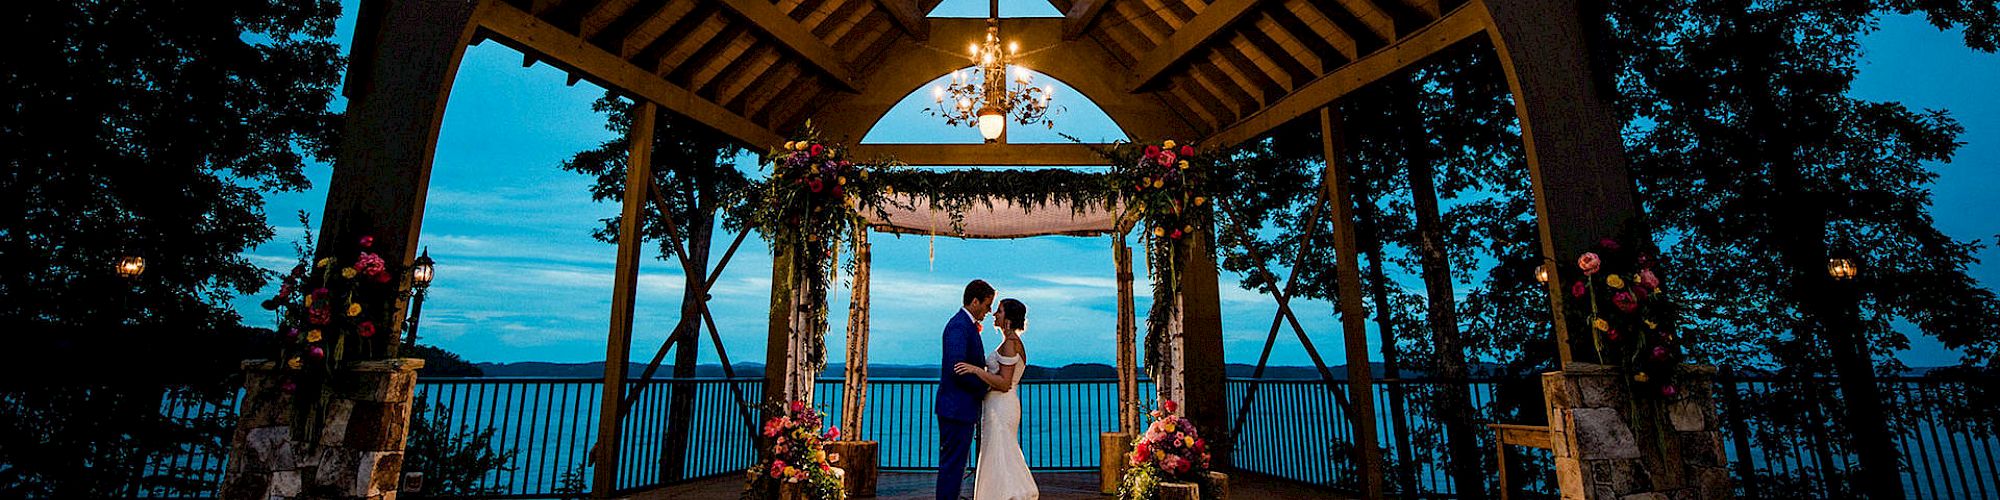 A couple shares a dance under a beautifully lit wooden gazebo with floral decorations, surrounded by trees and overlooking a body of water.